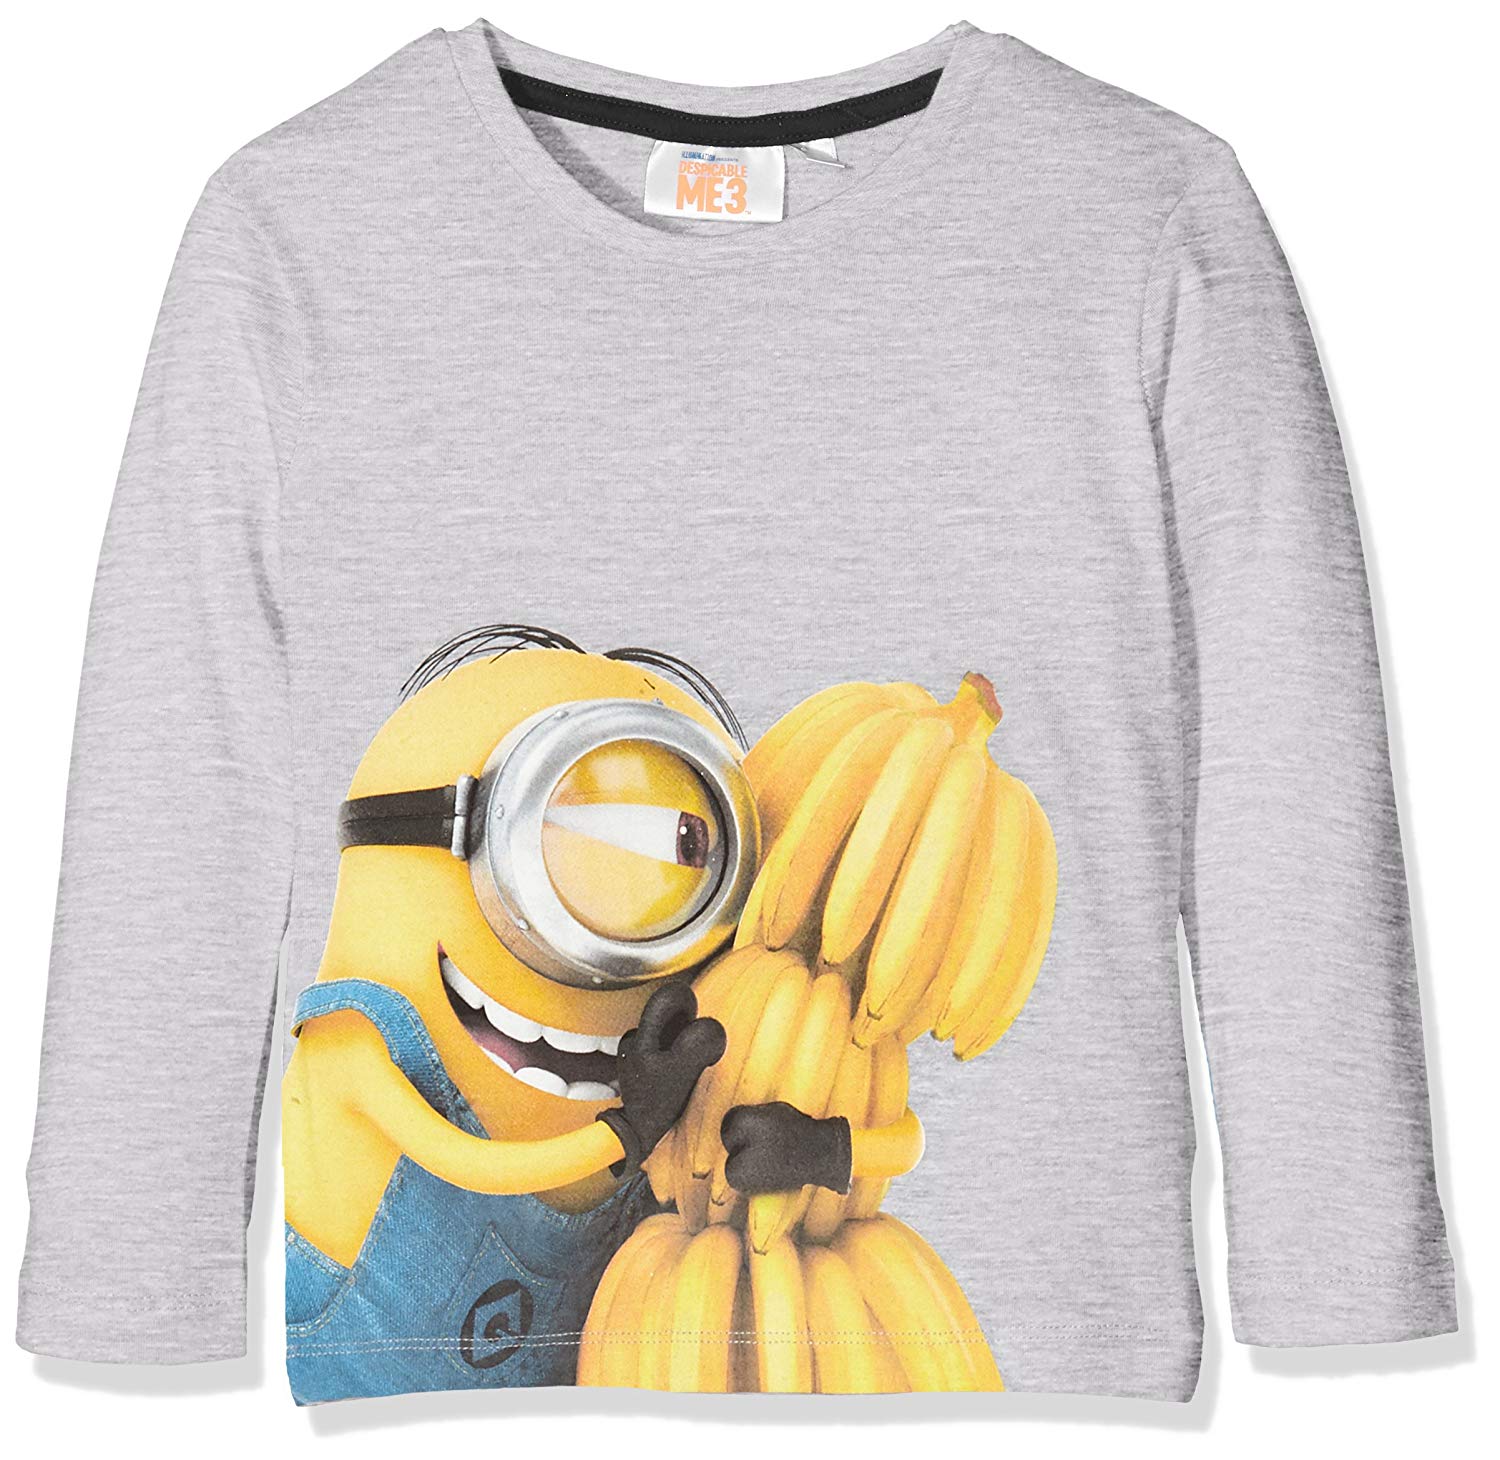 Universal Boys Minions Banana Grey T-Shirt - Stockpoint Apparel Outlet